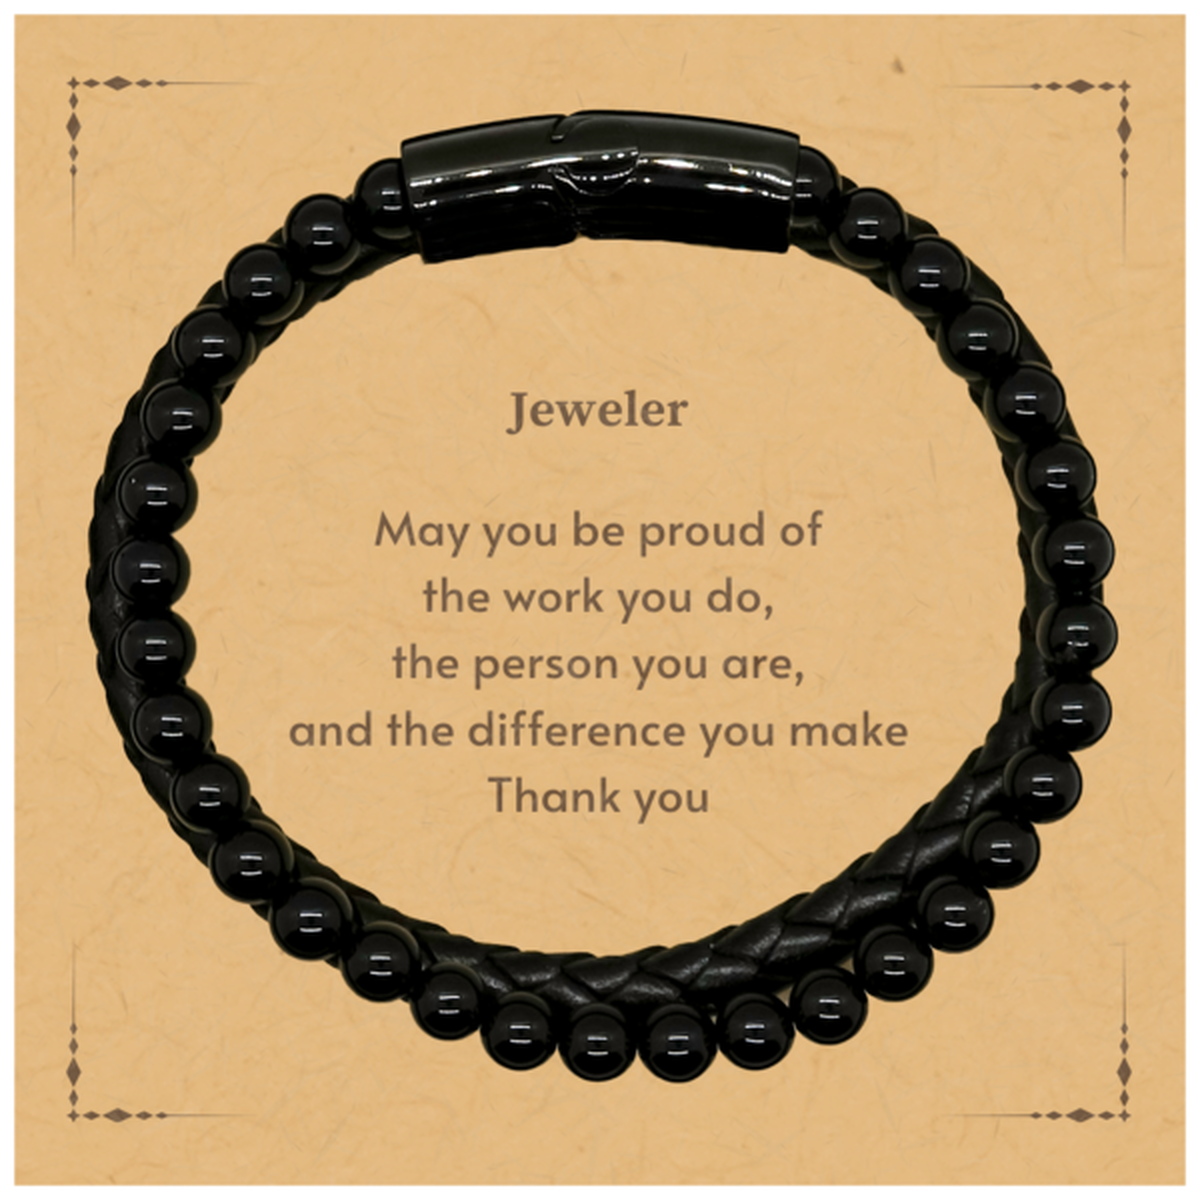 Heartwarming Stone Leather Bracelets Retirement Coworkers Gifts for Jeweler, Jeweler May You be proud of the work you do, the person you are Gifts for Boss Men Women Friends